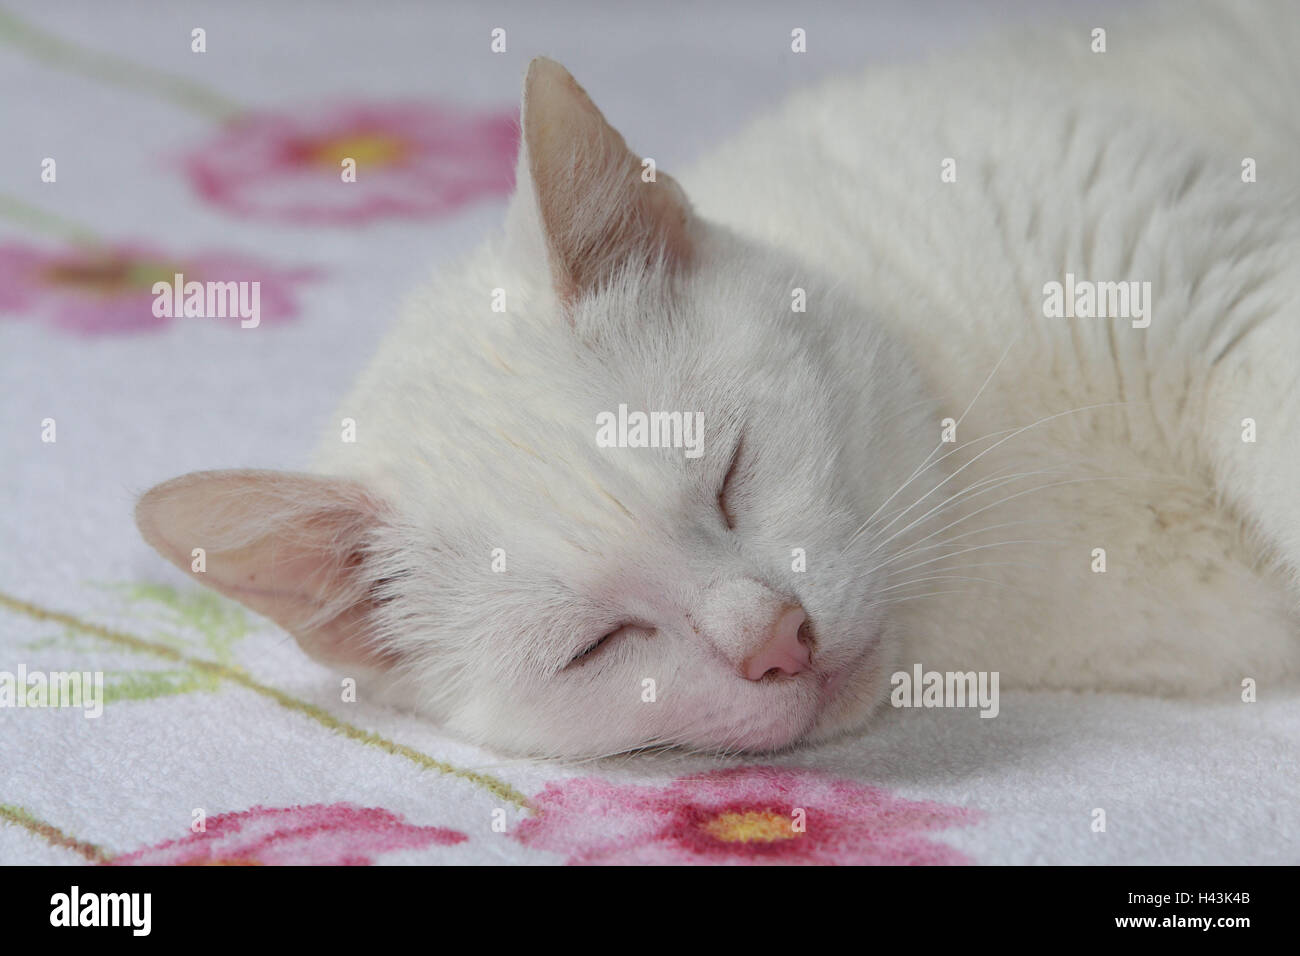 Cat, white, sleep, bed, portrait, animals, mammals, pets, small cats, Felidae, domesticates, house cat, lie, doze, peacefully, fatigue, sleep, rest, recreation, rest, individually, only, animal portrait, cat's portrait, inside, Stock Photo